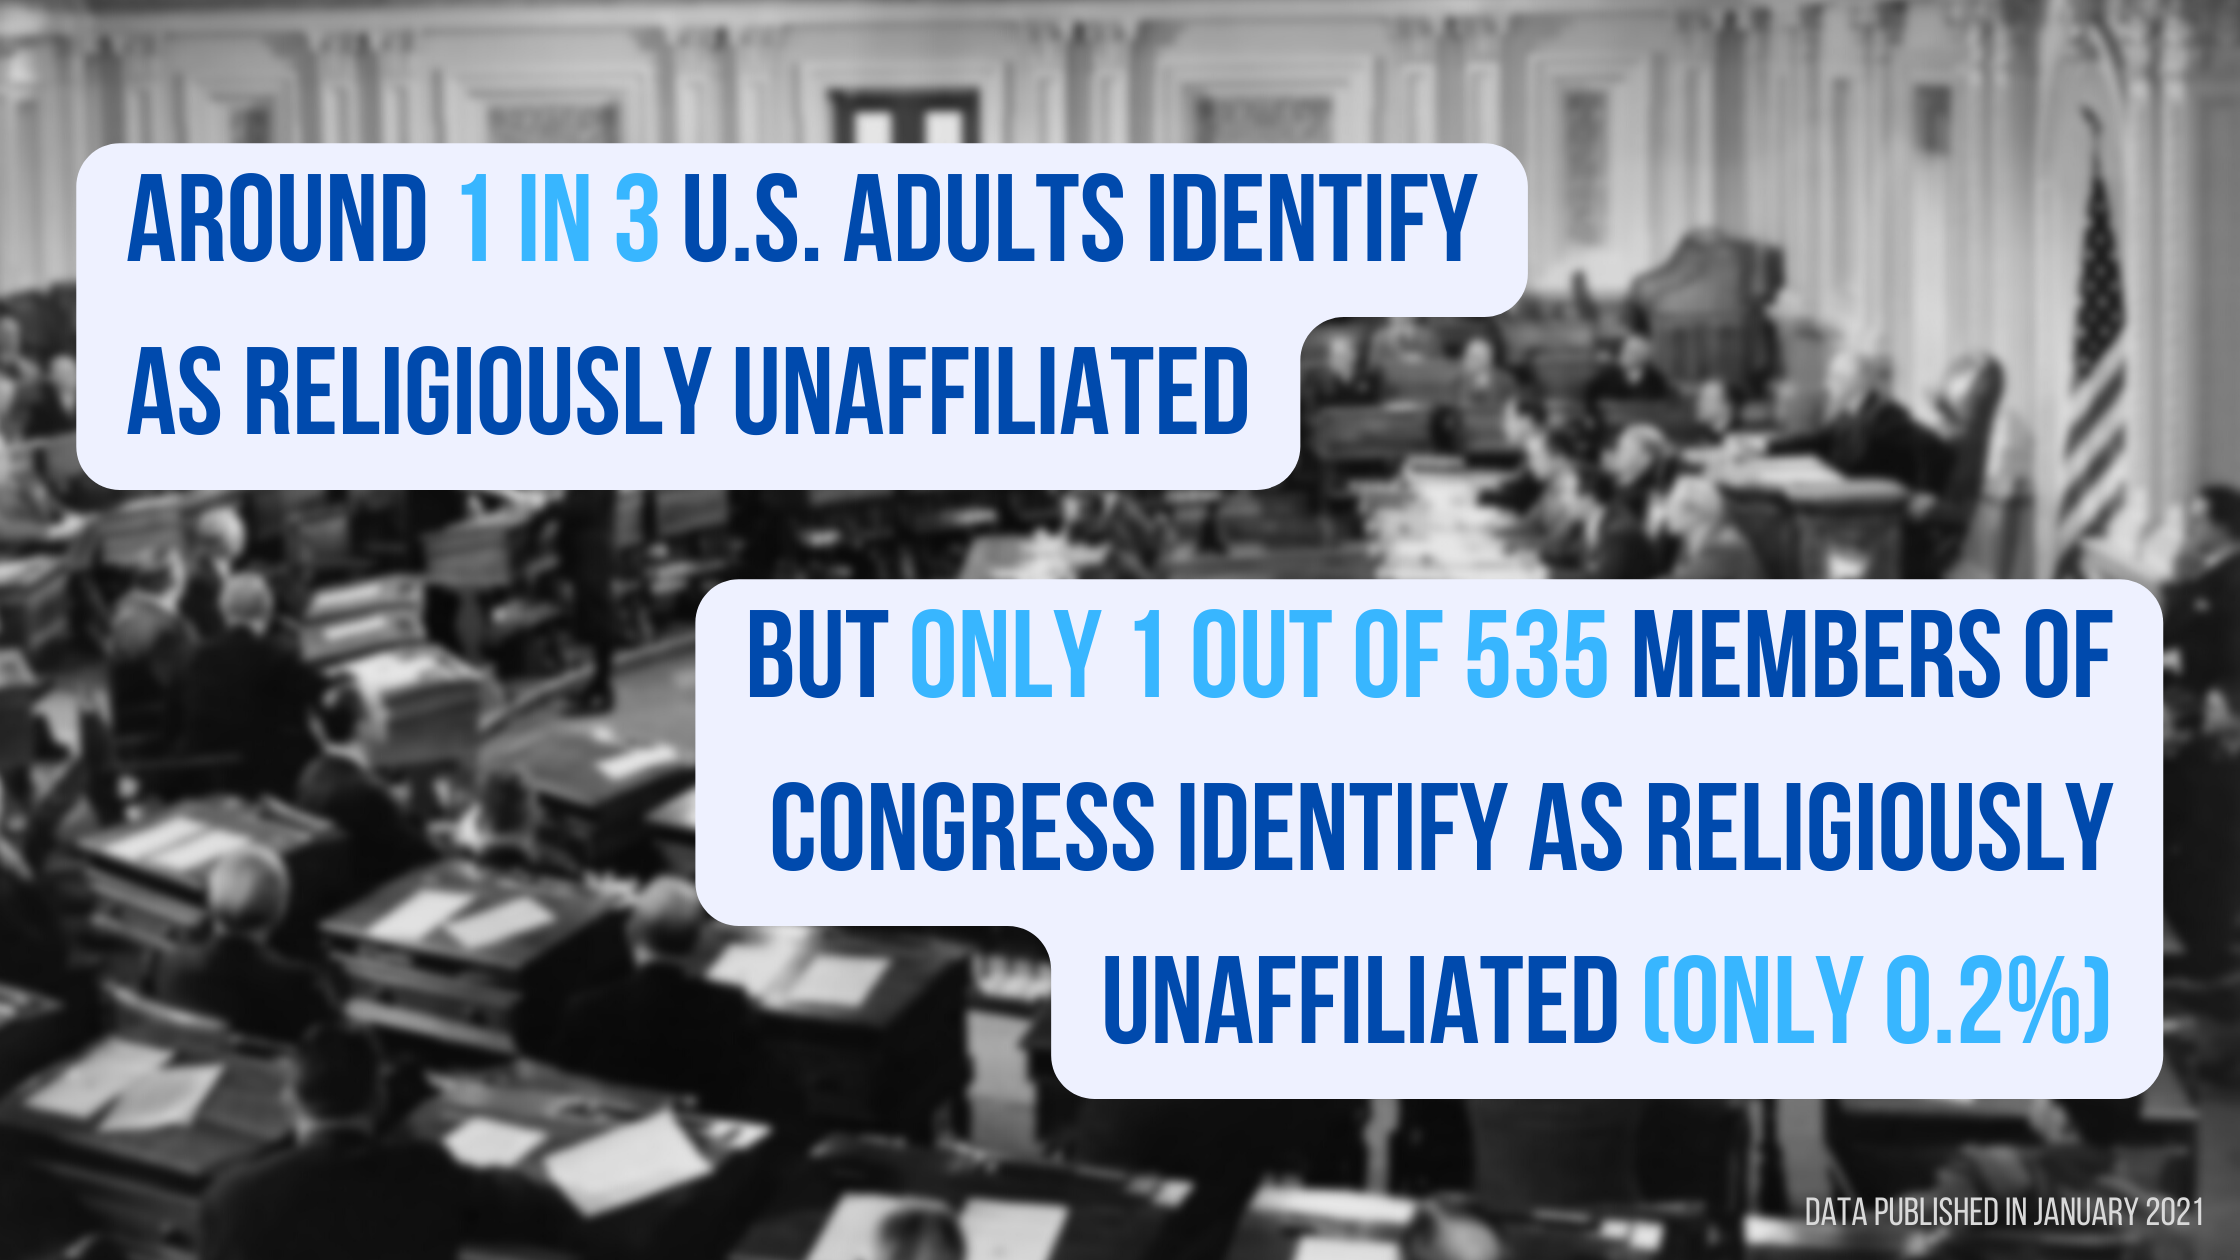 Around 1in 3 U.S. adults identify as religiously unaffiliated, but only 1 out of 535 members of Congress identify as religiously unaffiliated (less than 0.2)%